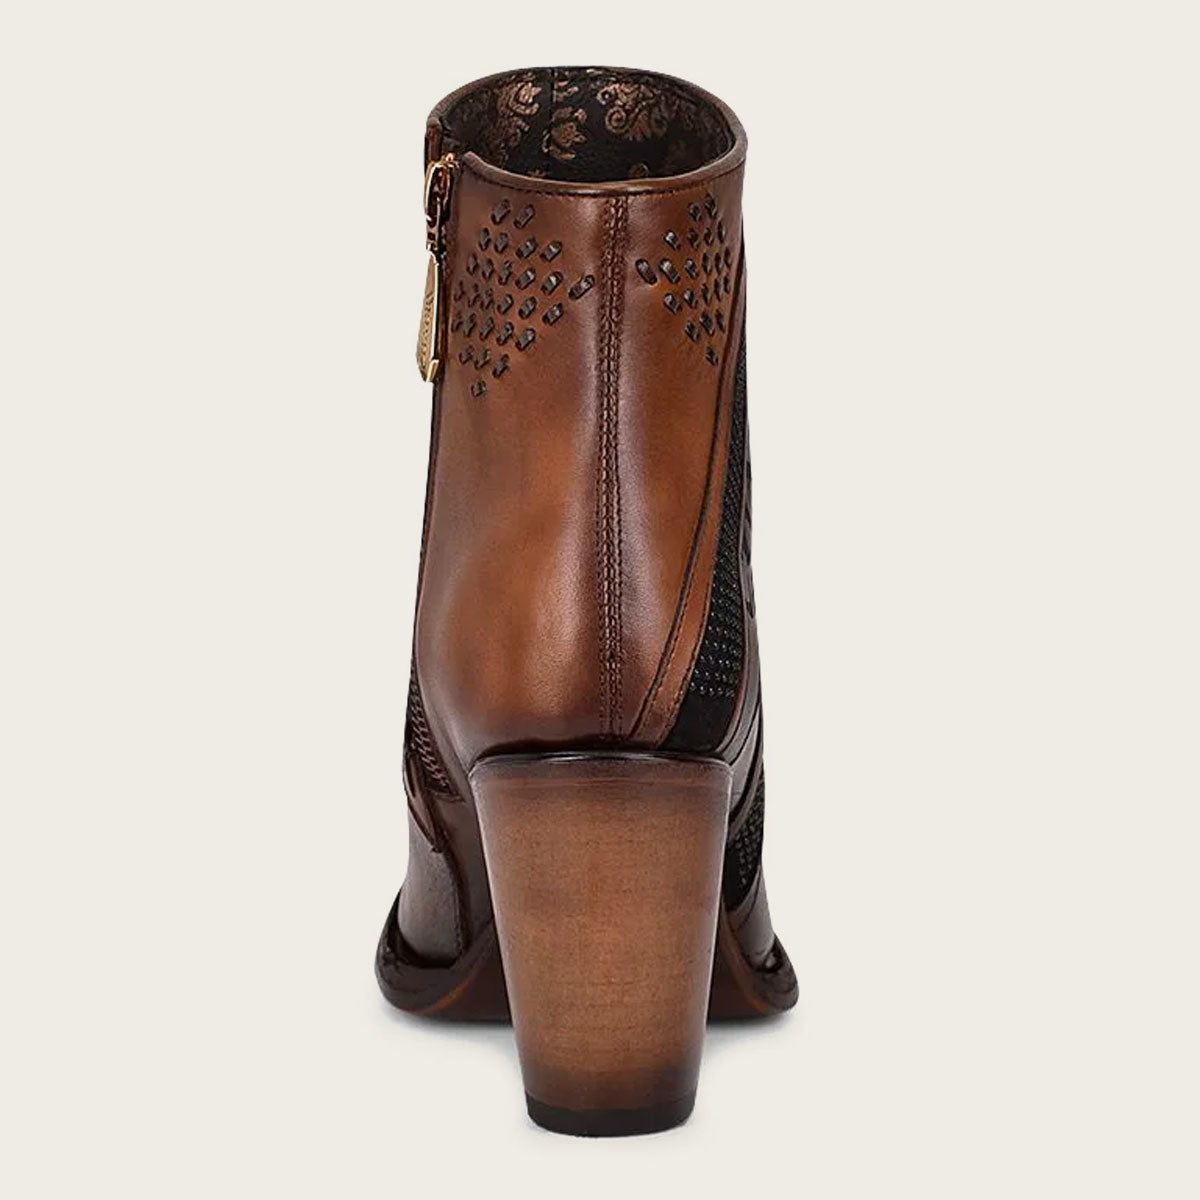 Brown hand-painted leather ankle bootie with decorative accents.